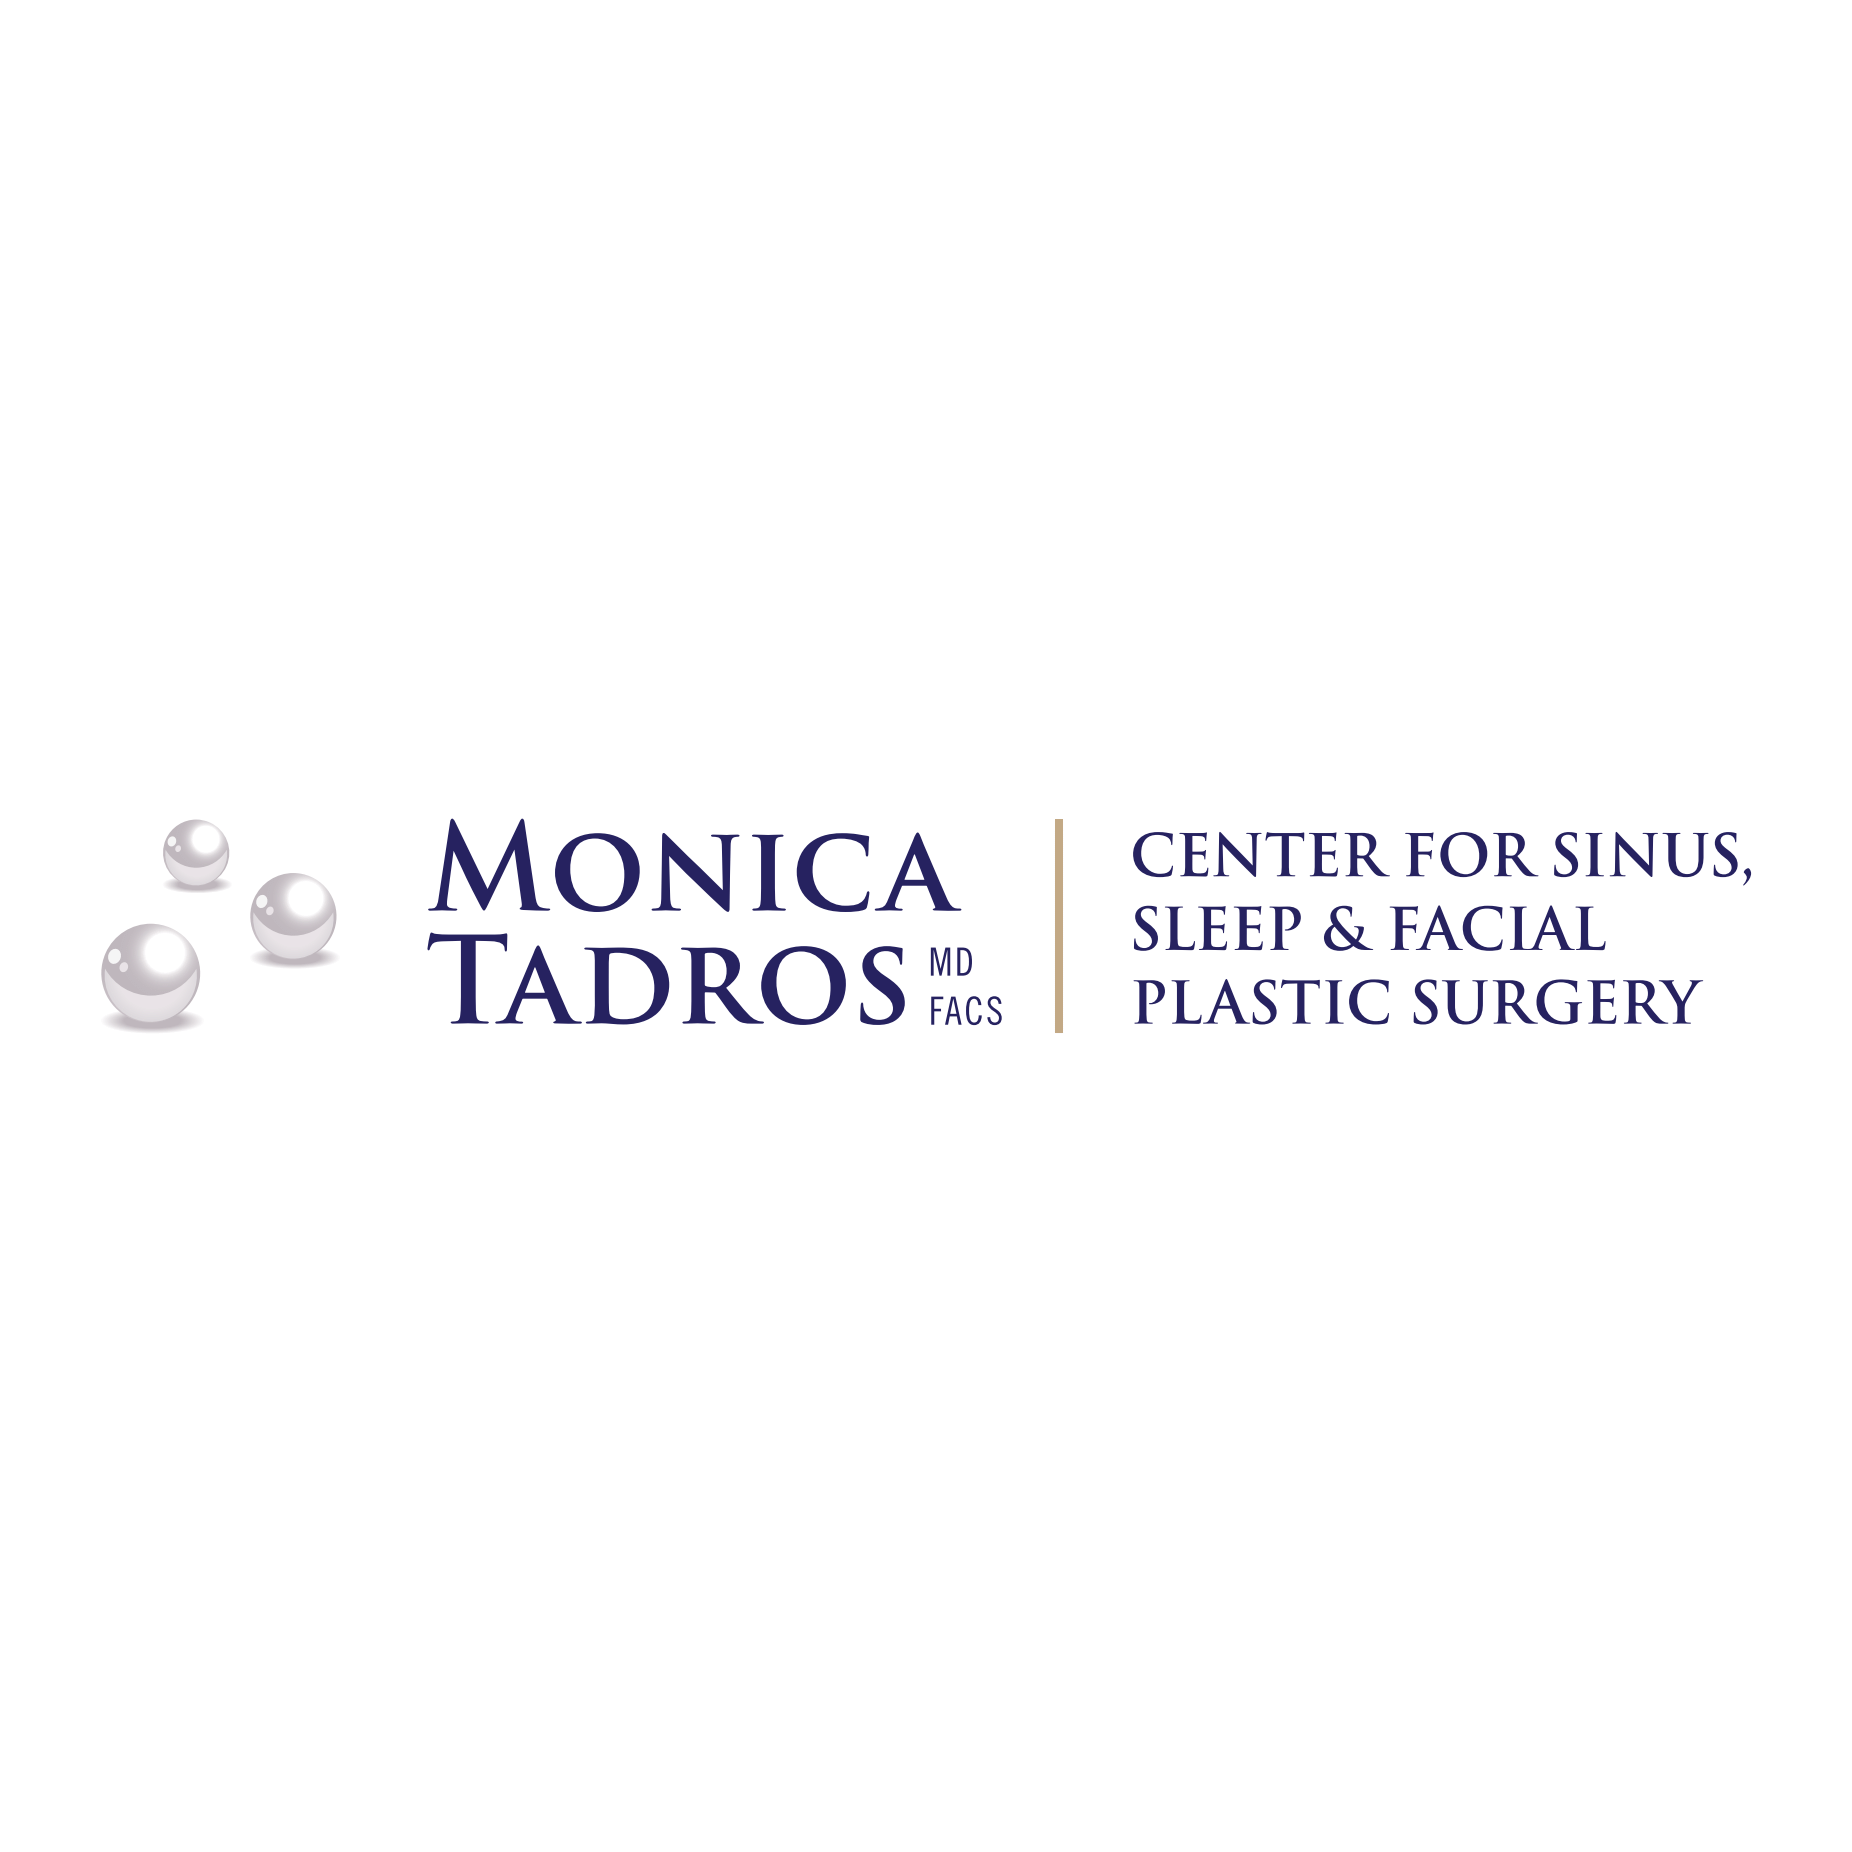 Dr. Monica Tadros is a distinguished Sinus, Sleep and Facial Plastic Surgeon and Fellow of the American College of Surgeons. She is one of a small number of surgeons to attain double board certification by the American Board of Otolaryngology and the American Board of Facial Plastic & Reconstructive Surgery.